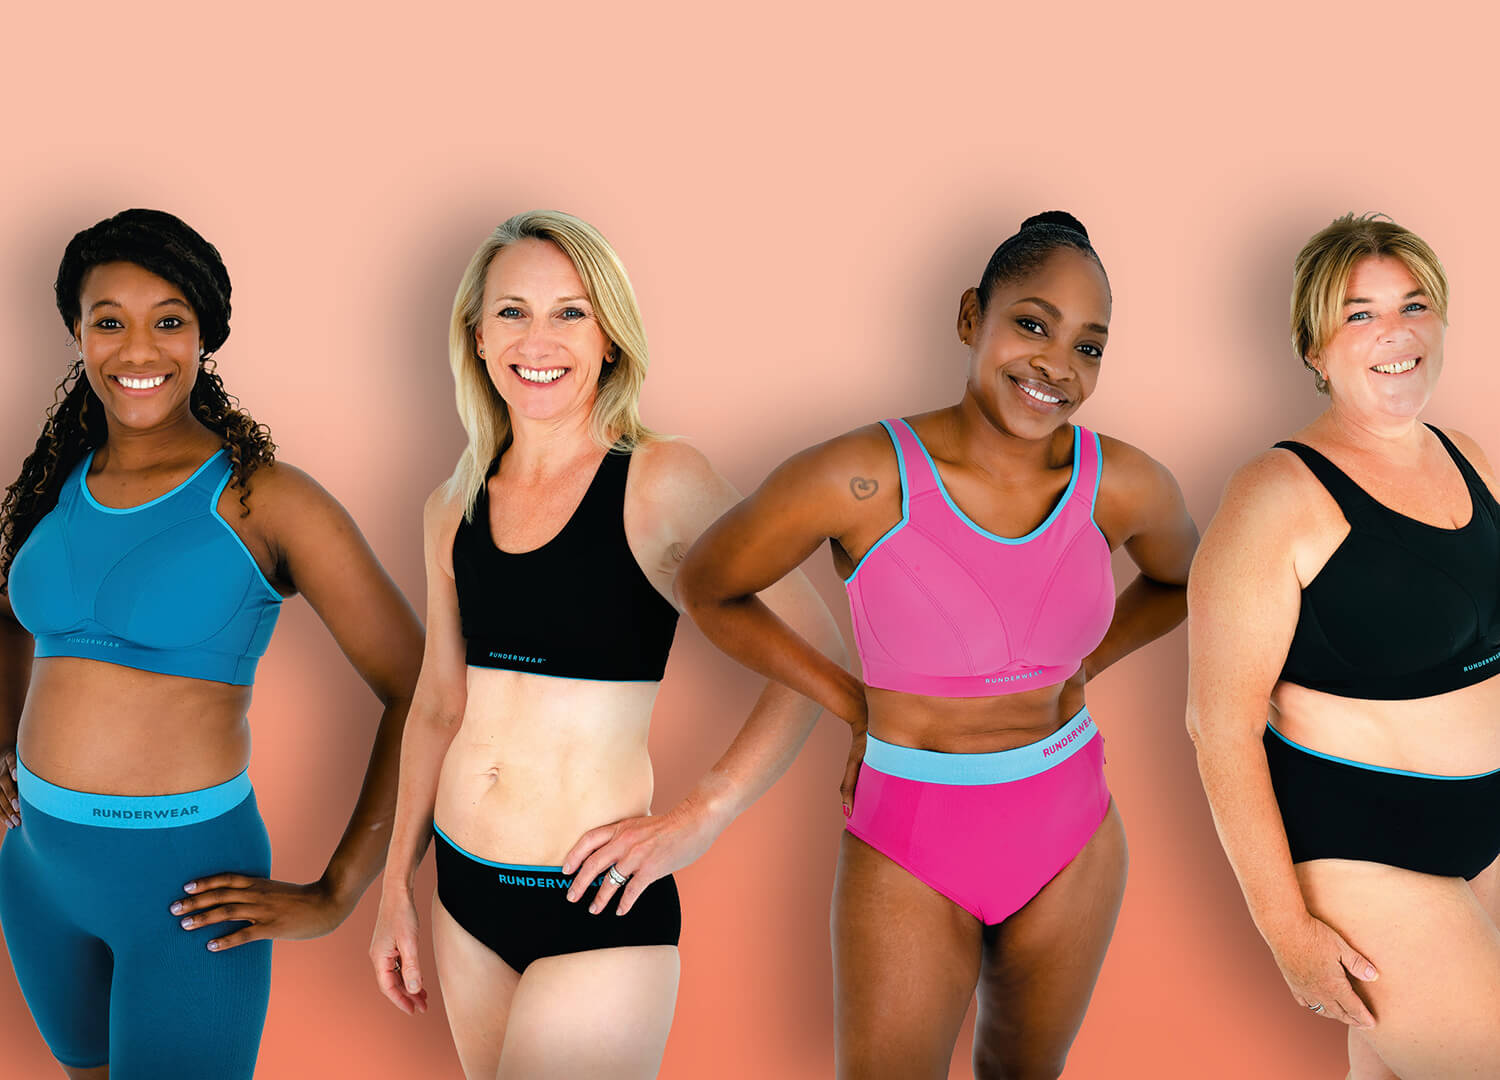 Find Your Perfect Fitting Bra for Running and Exercise